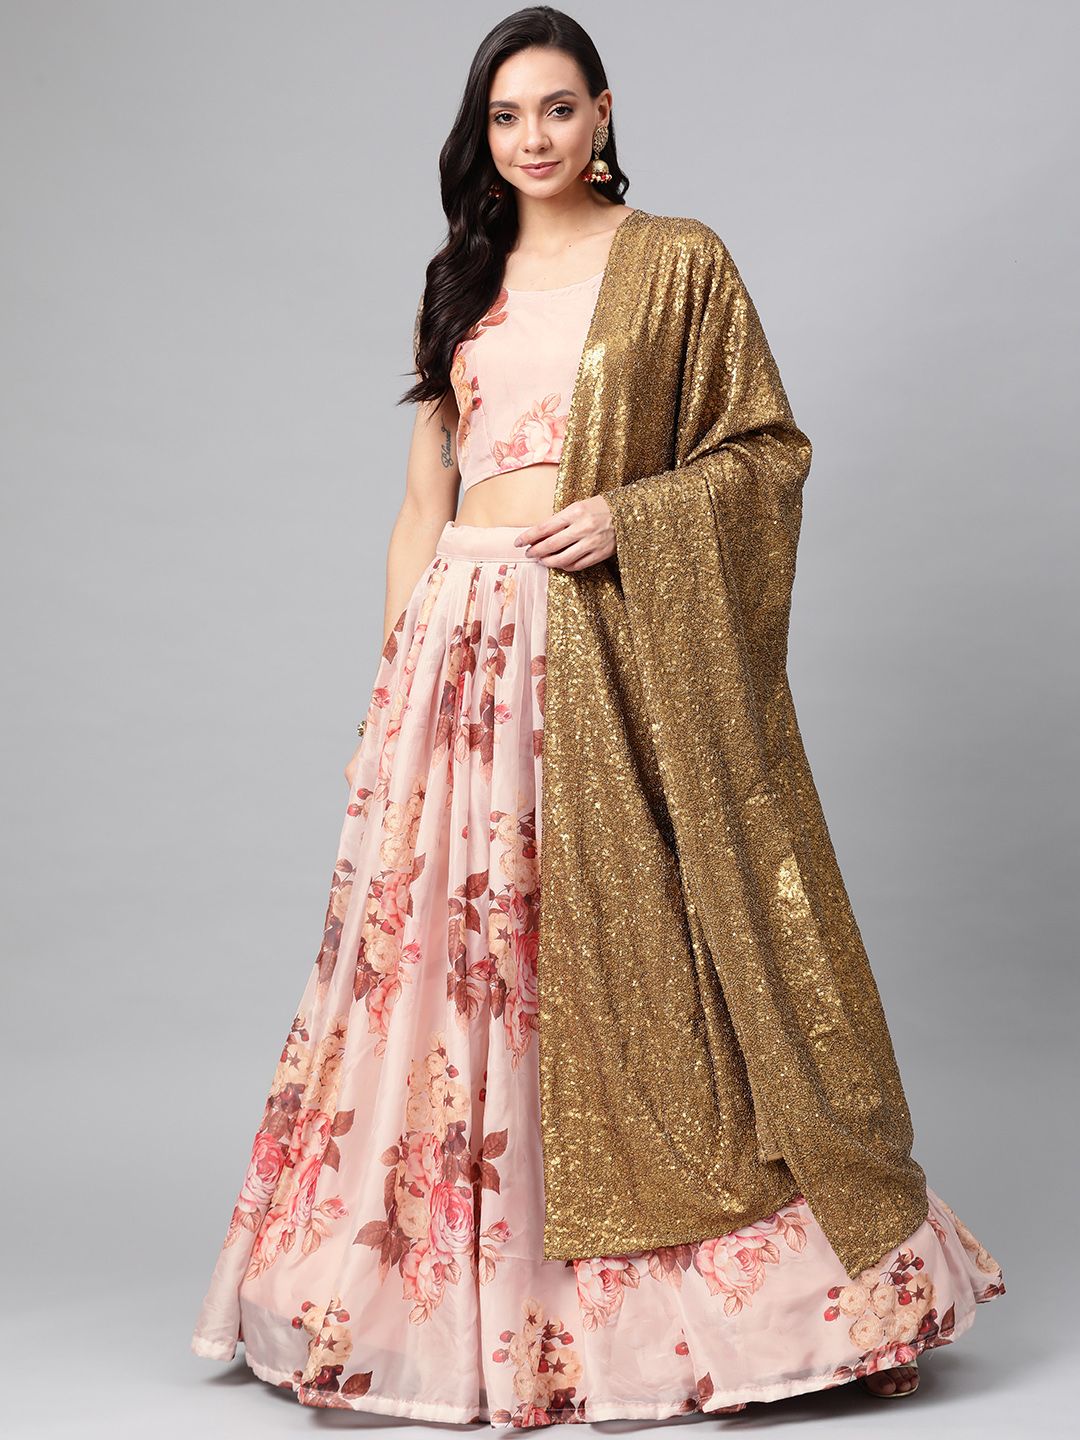 SHOPGARB Peach-Coloured Printed Semi-Stitched Lehenga & Unstitched Blouse with Dupatta Price in India